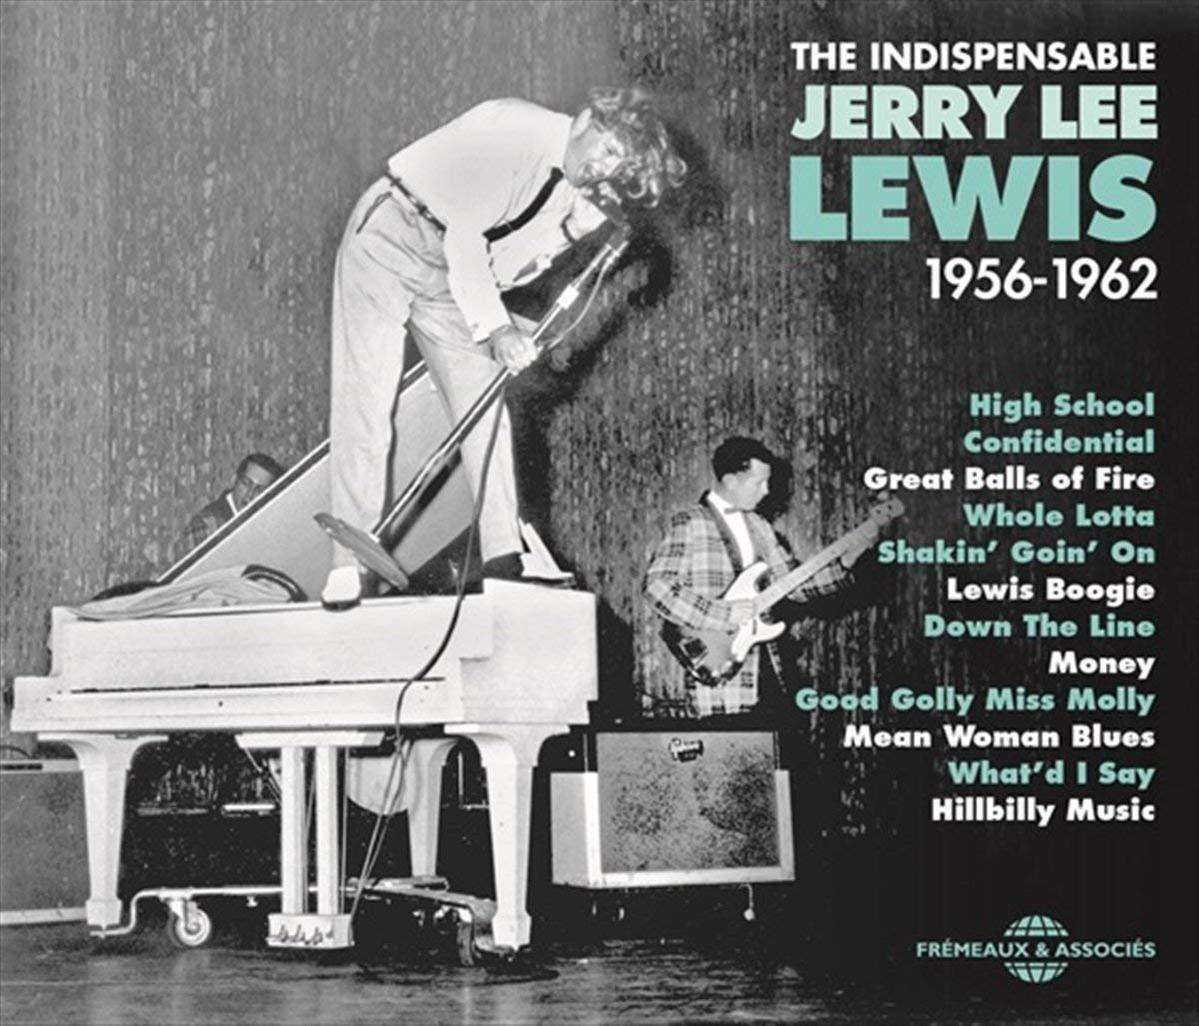 Jerry Lee Lewis - The Indispensable - (CD) 1956-1962